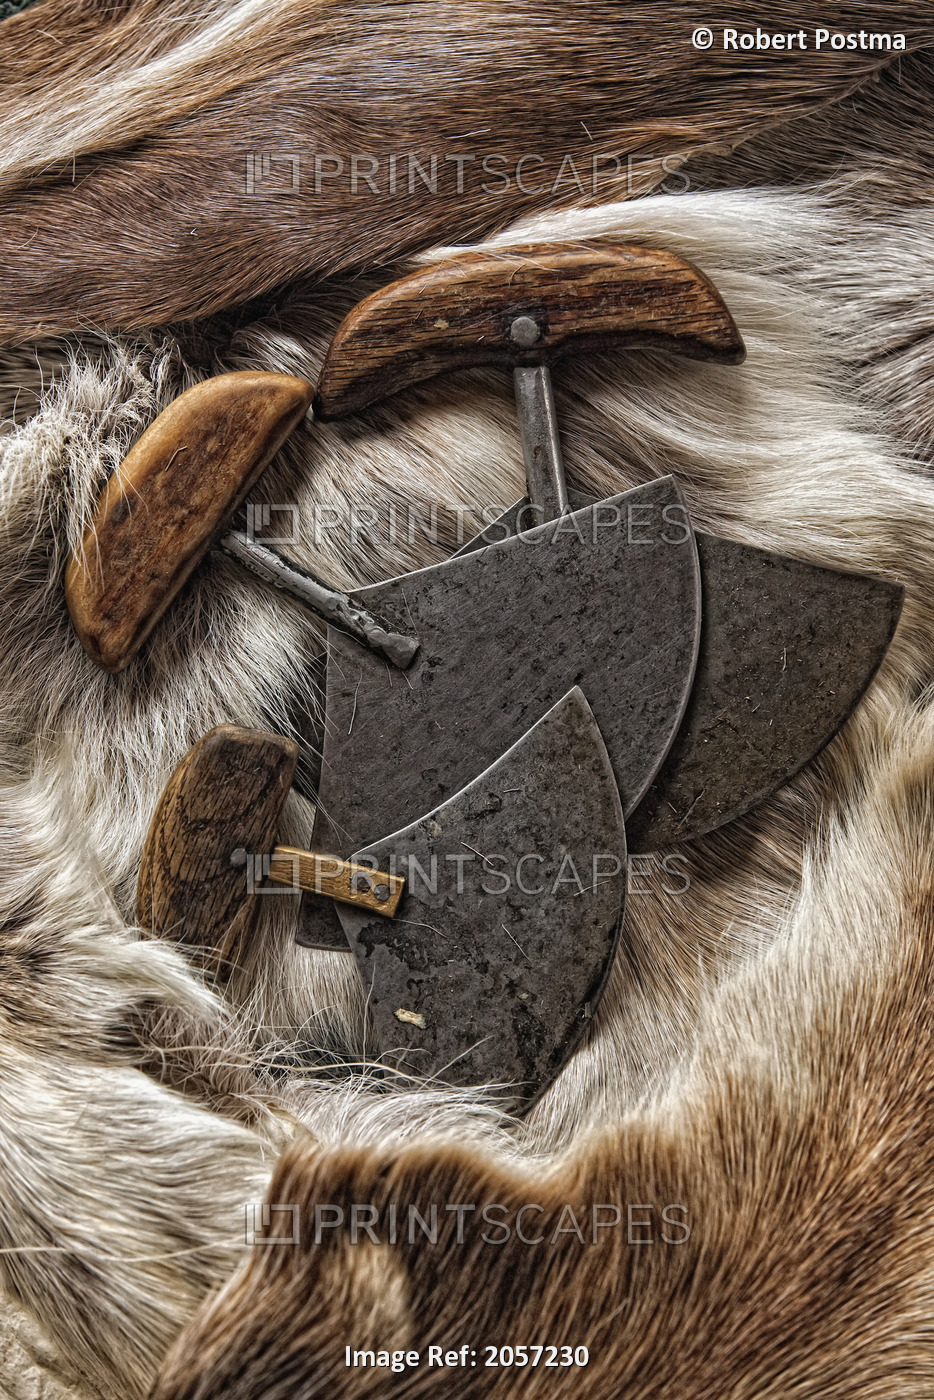 Ulu's, The Traditional Knife Of The Inuit, Churchill, Manitoba.